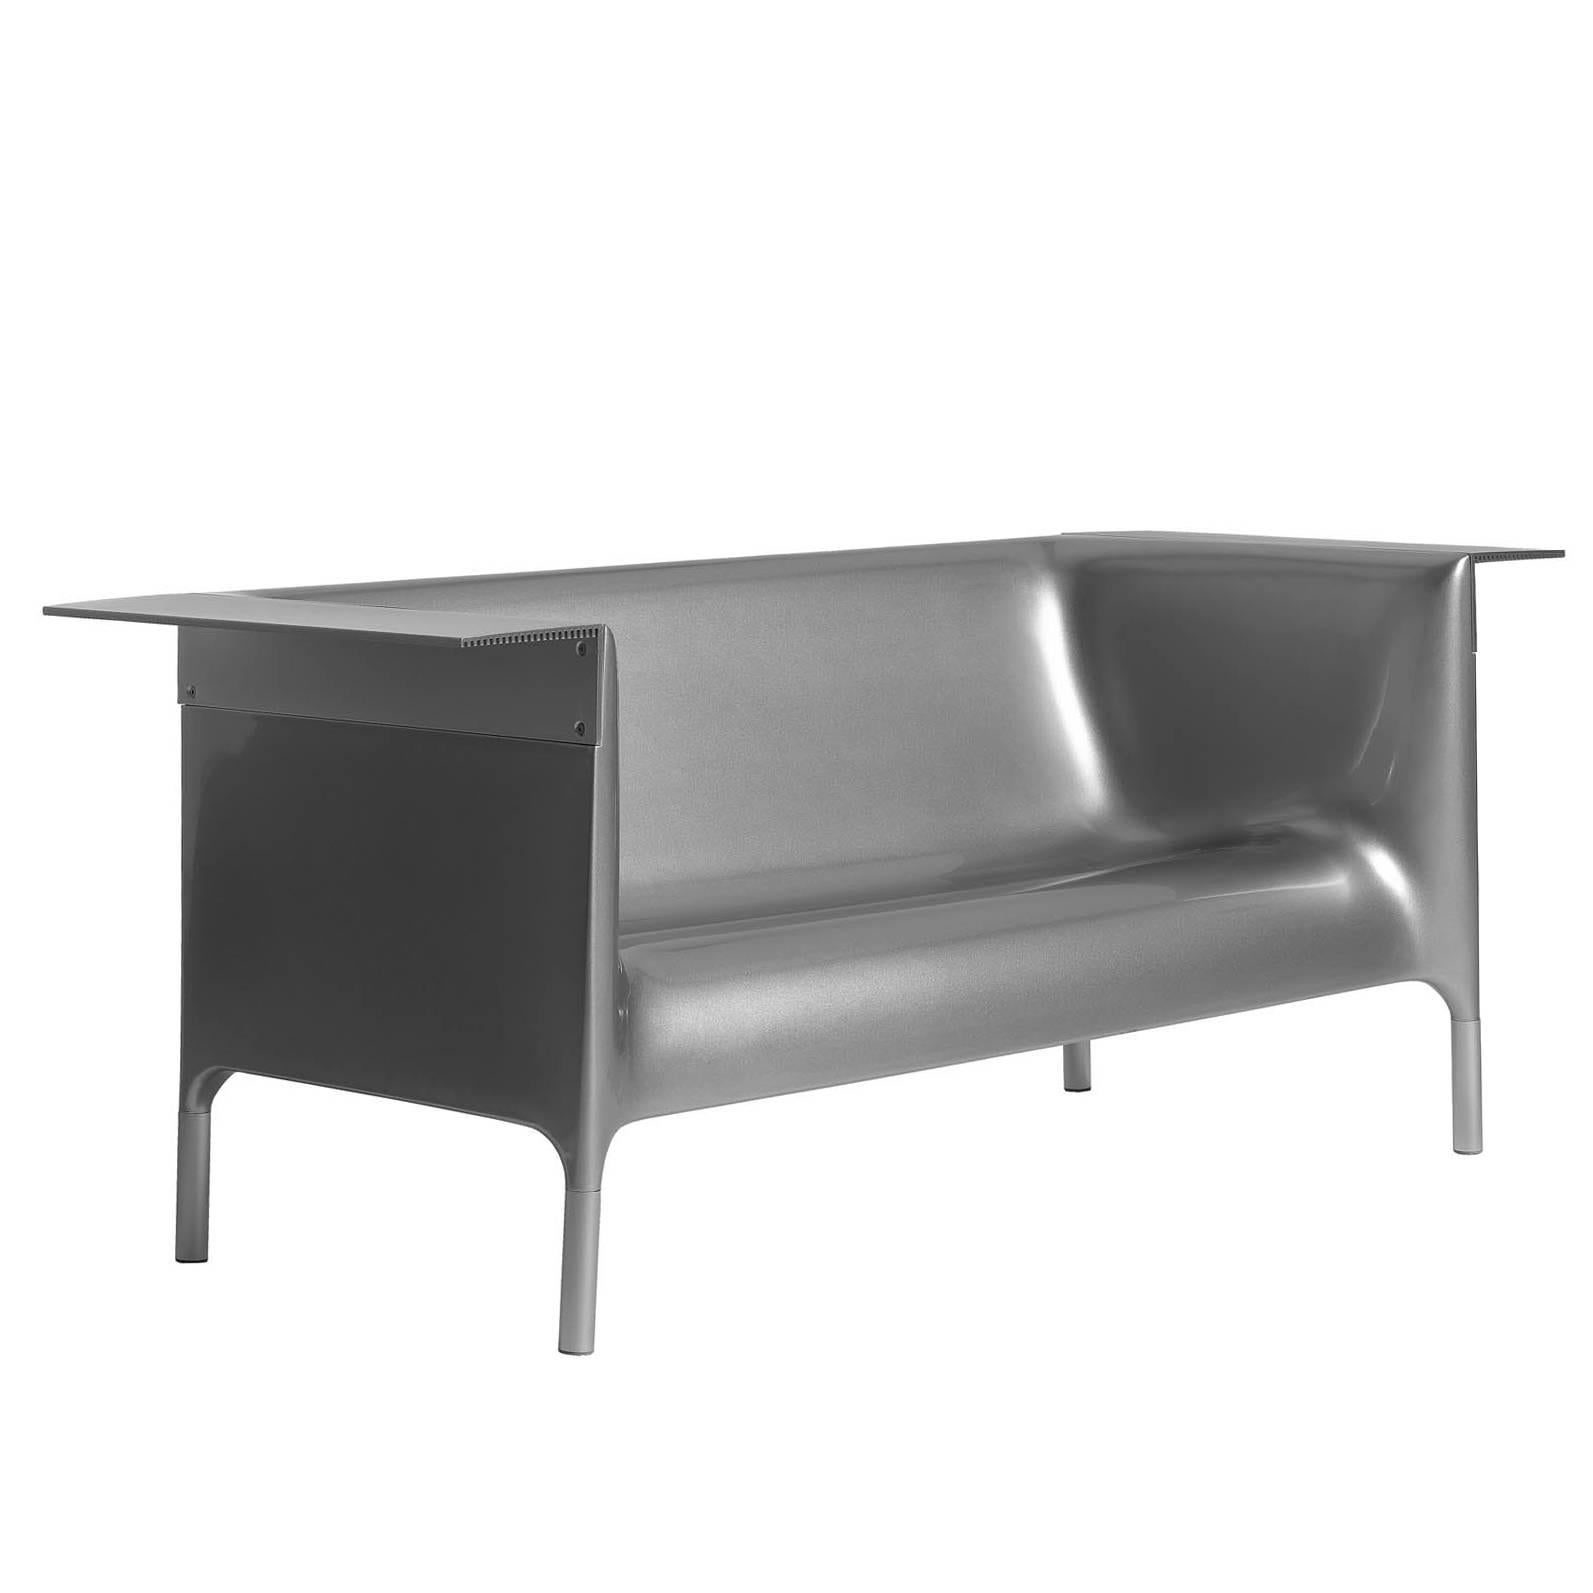 "Out/In" Metallic Silver Gray Colored Sofa by P. Starck & E. Quitllet for Driade For Sale